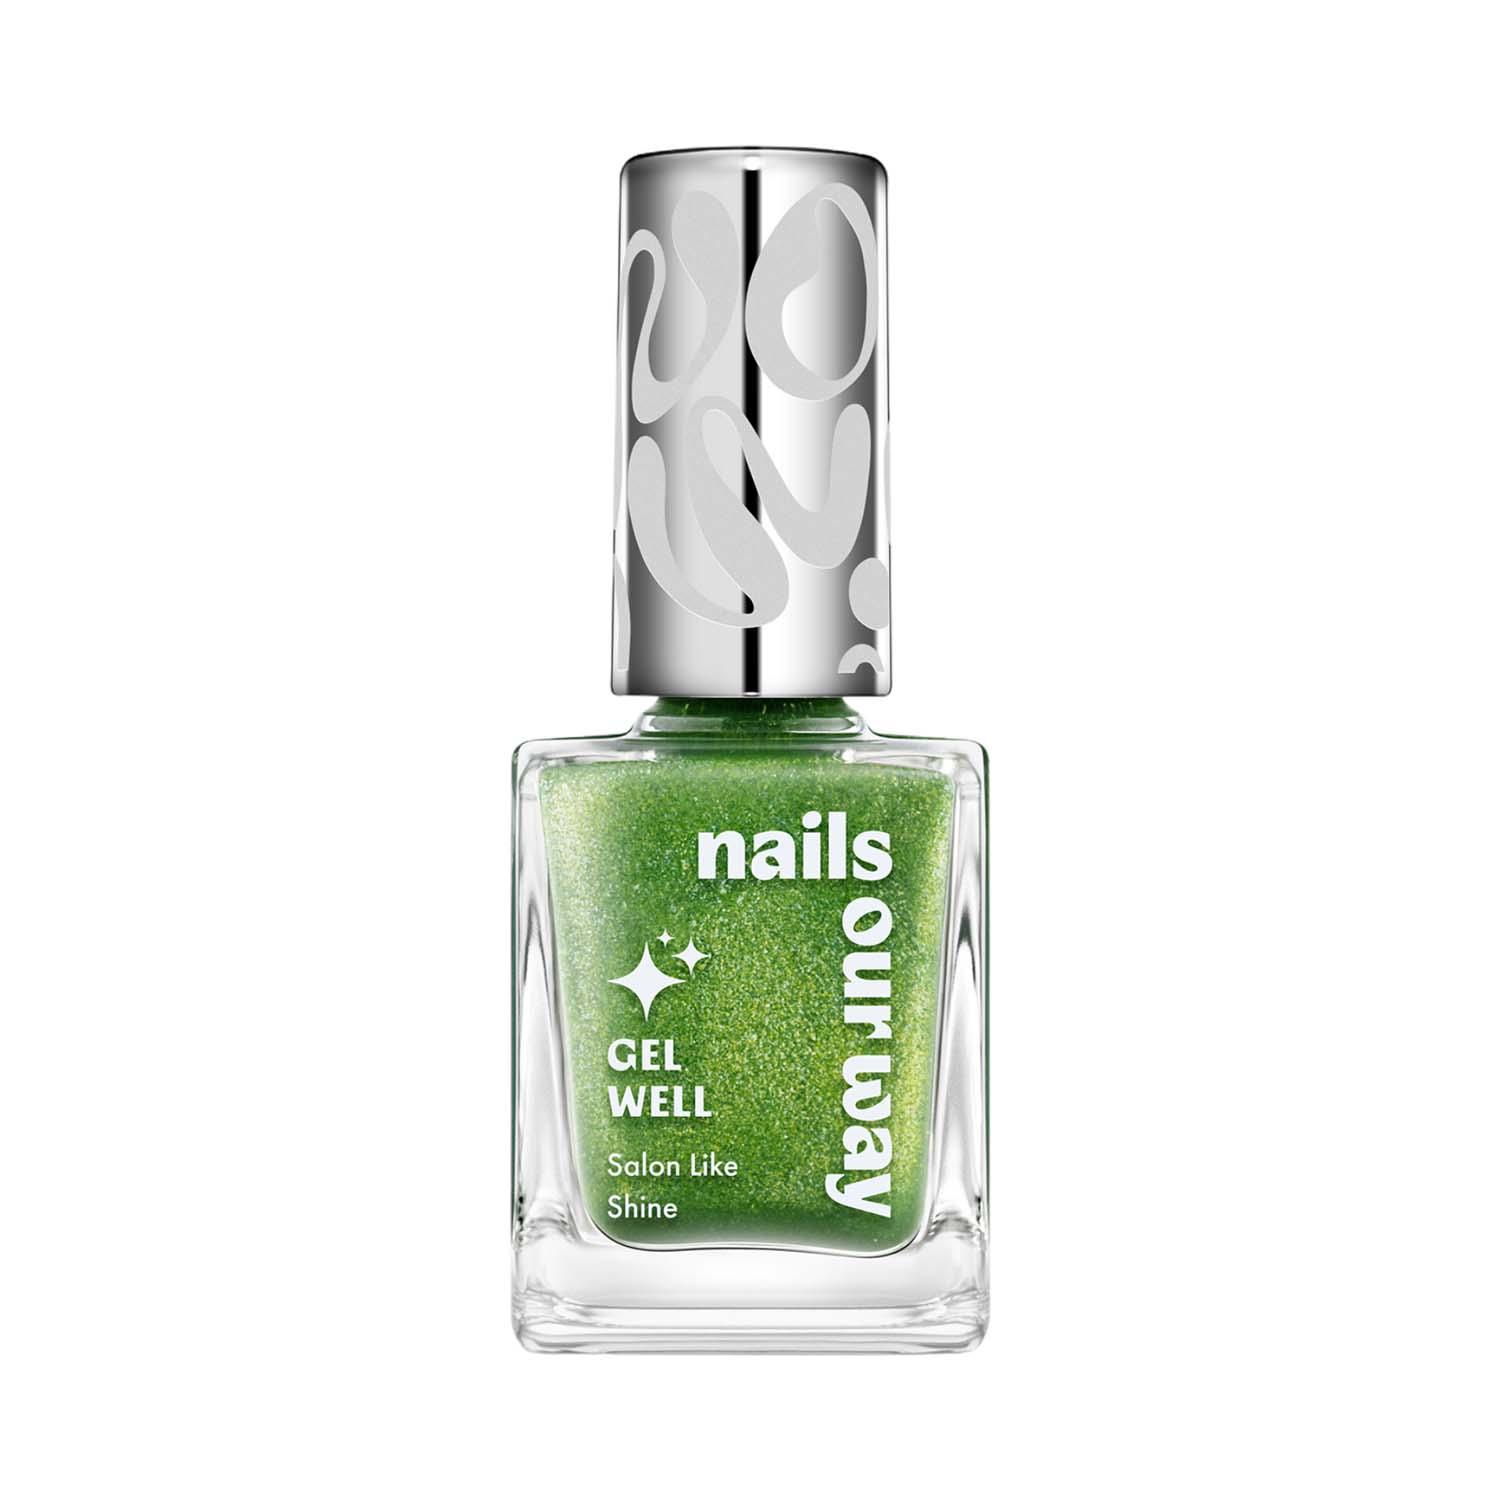 Nails Our Way | Nails Our Way Gel Well Nail Enamel - 404 Snarky (10 ml)